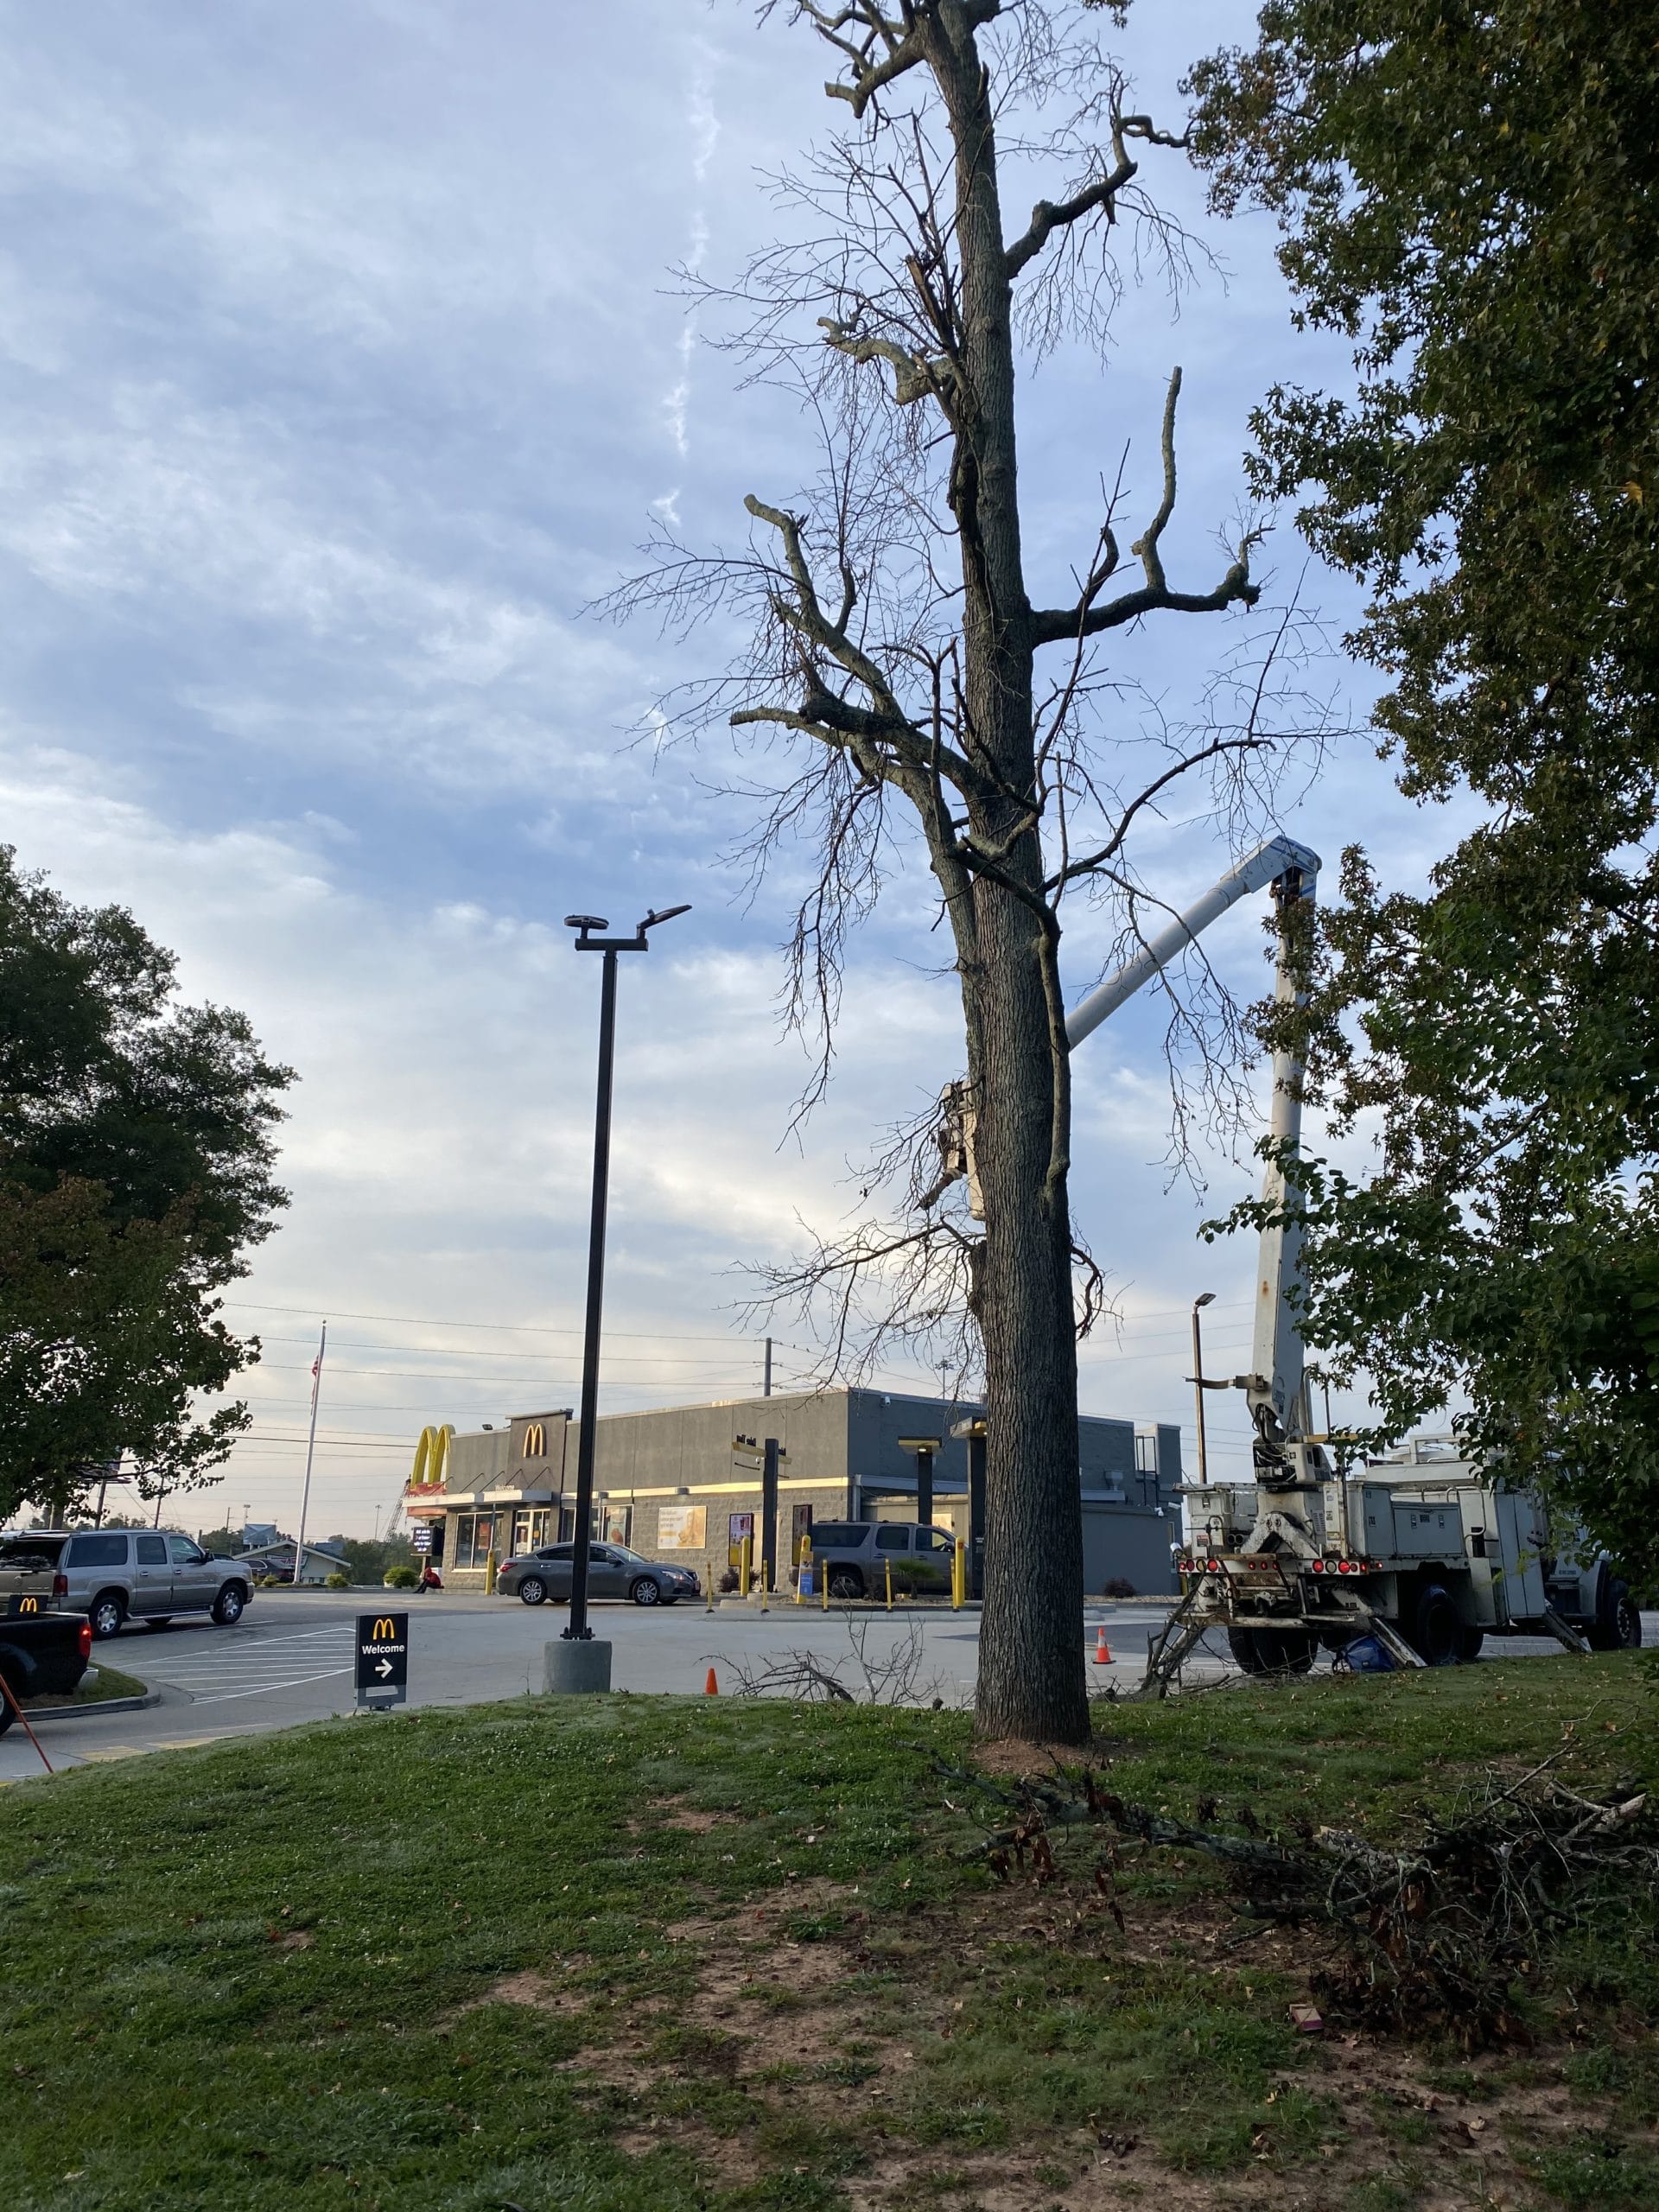 Dead tree removal at mcdonalds